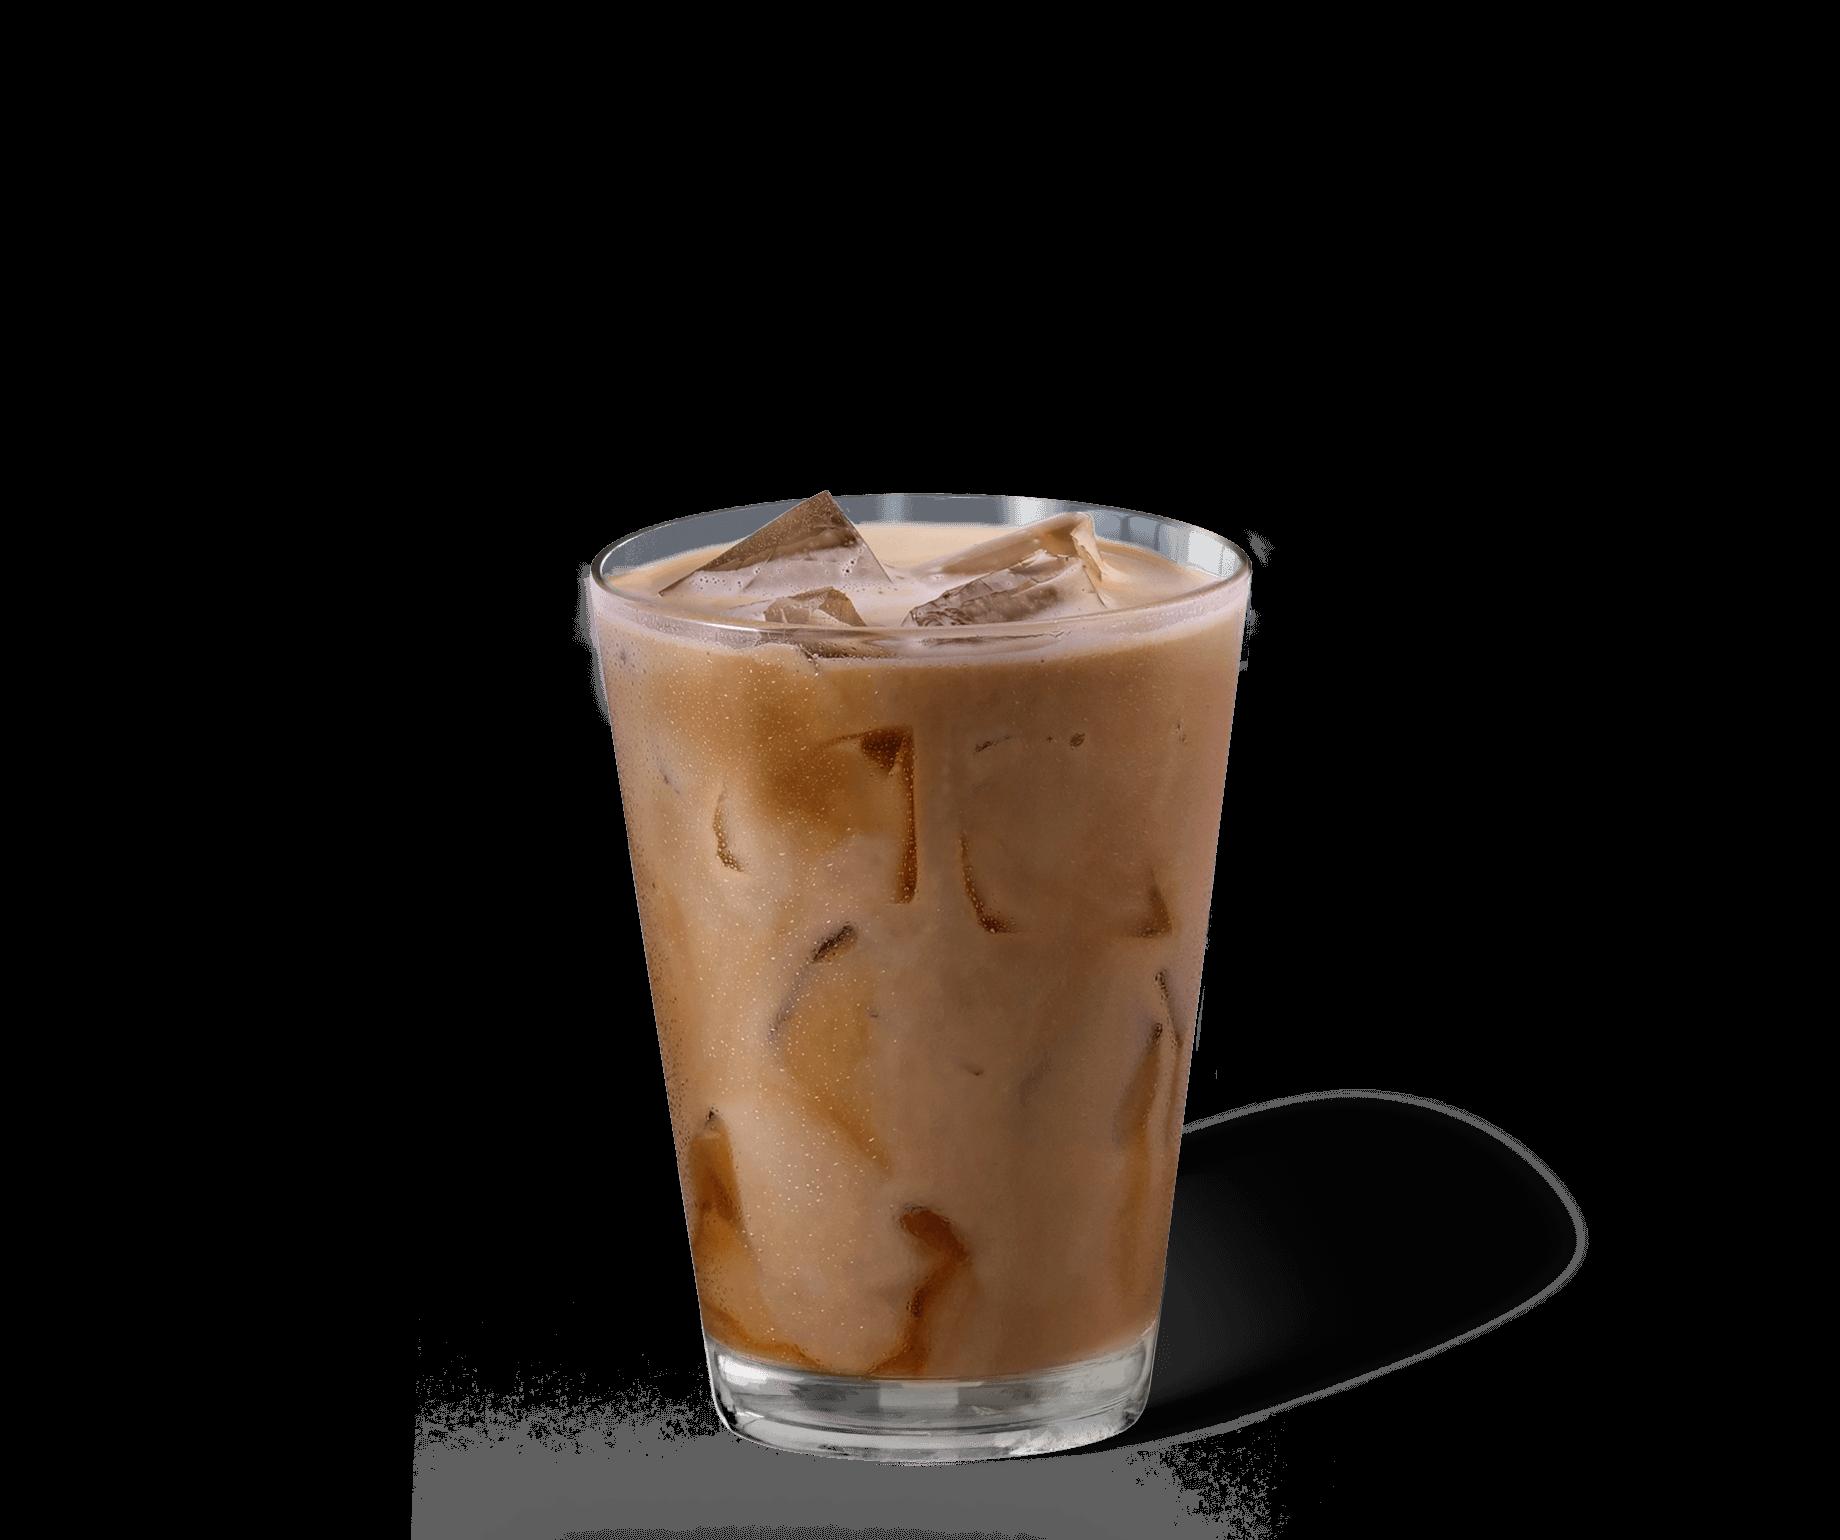  This iced cafe latte recipe is the perfect drink to enjoy a hot summer day.